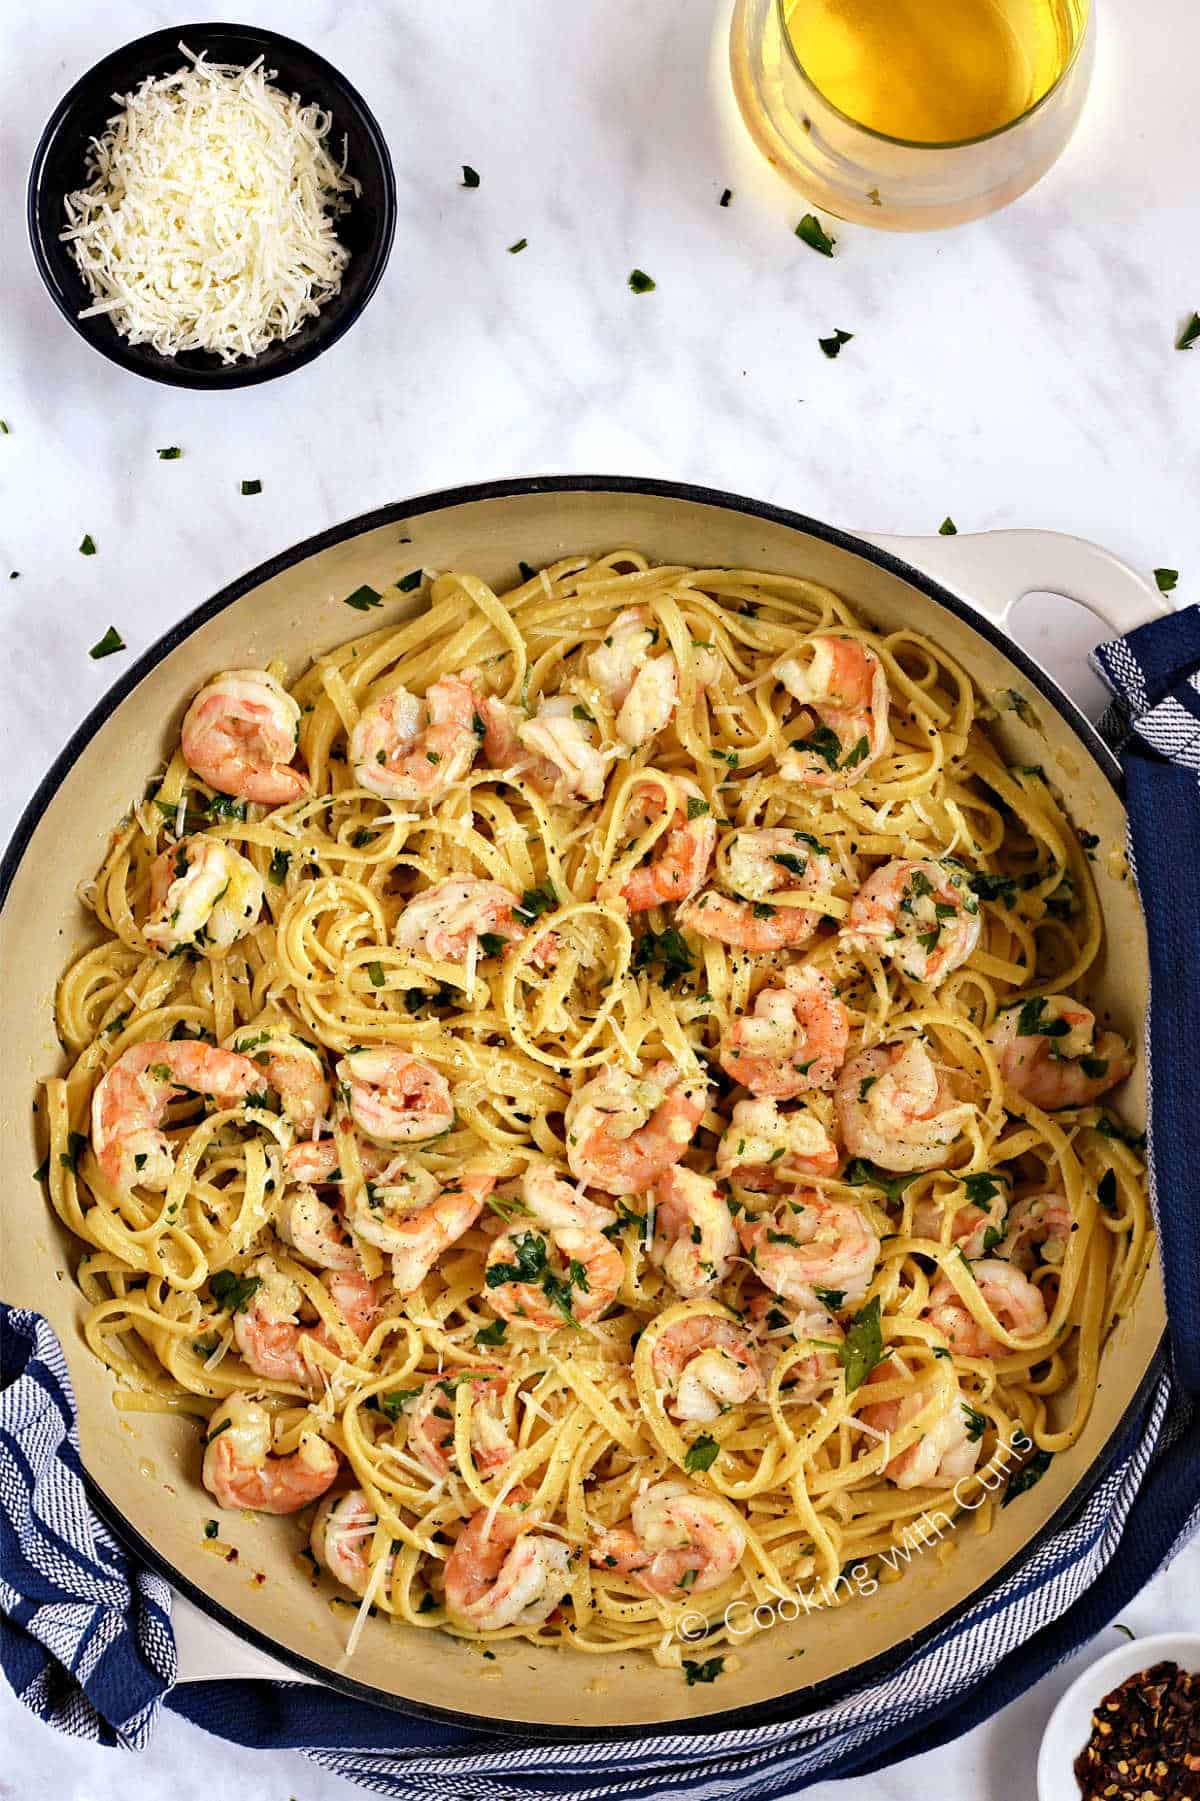 Looking down on shrimp and linguine pasta tossed with garlic, lemon, and wine sauce in a large skillet.